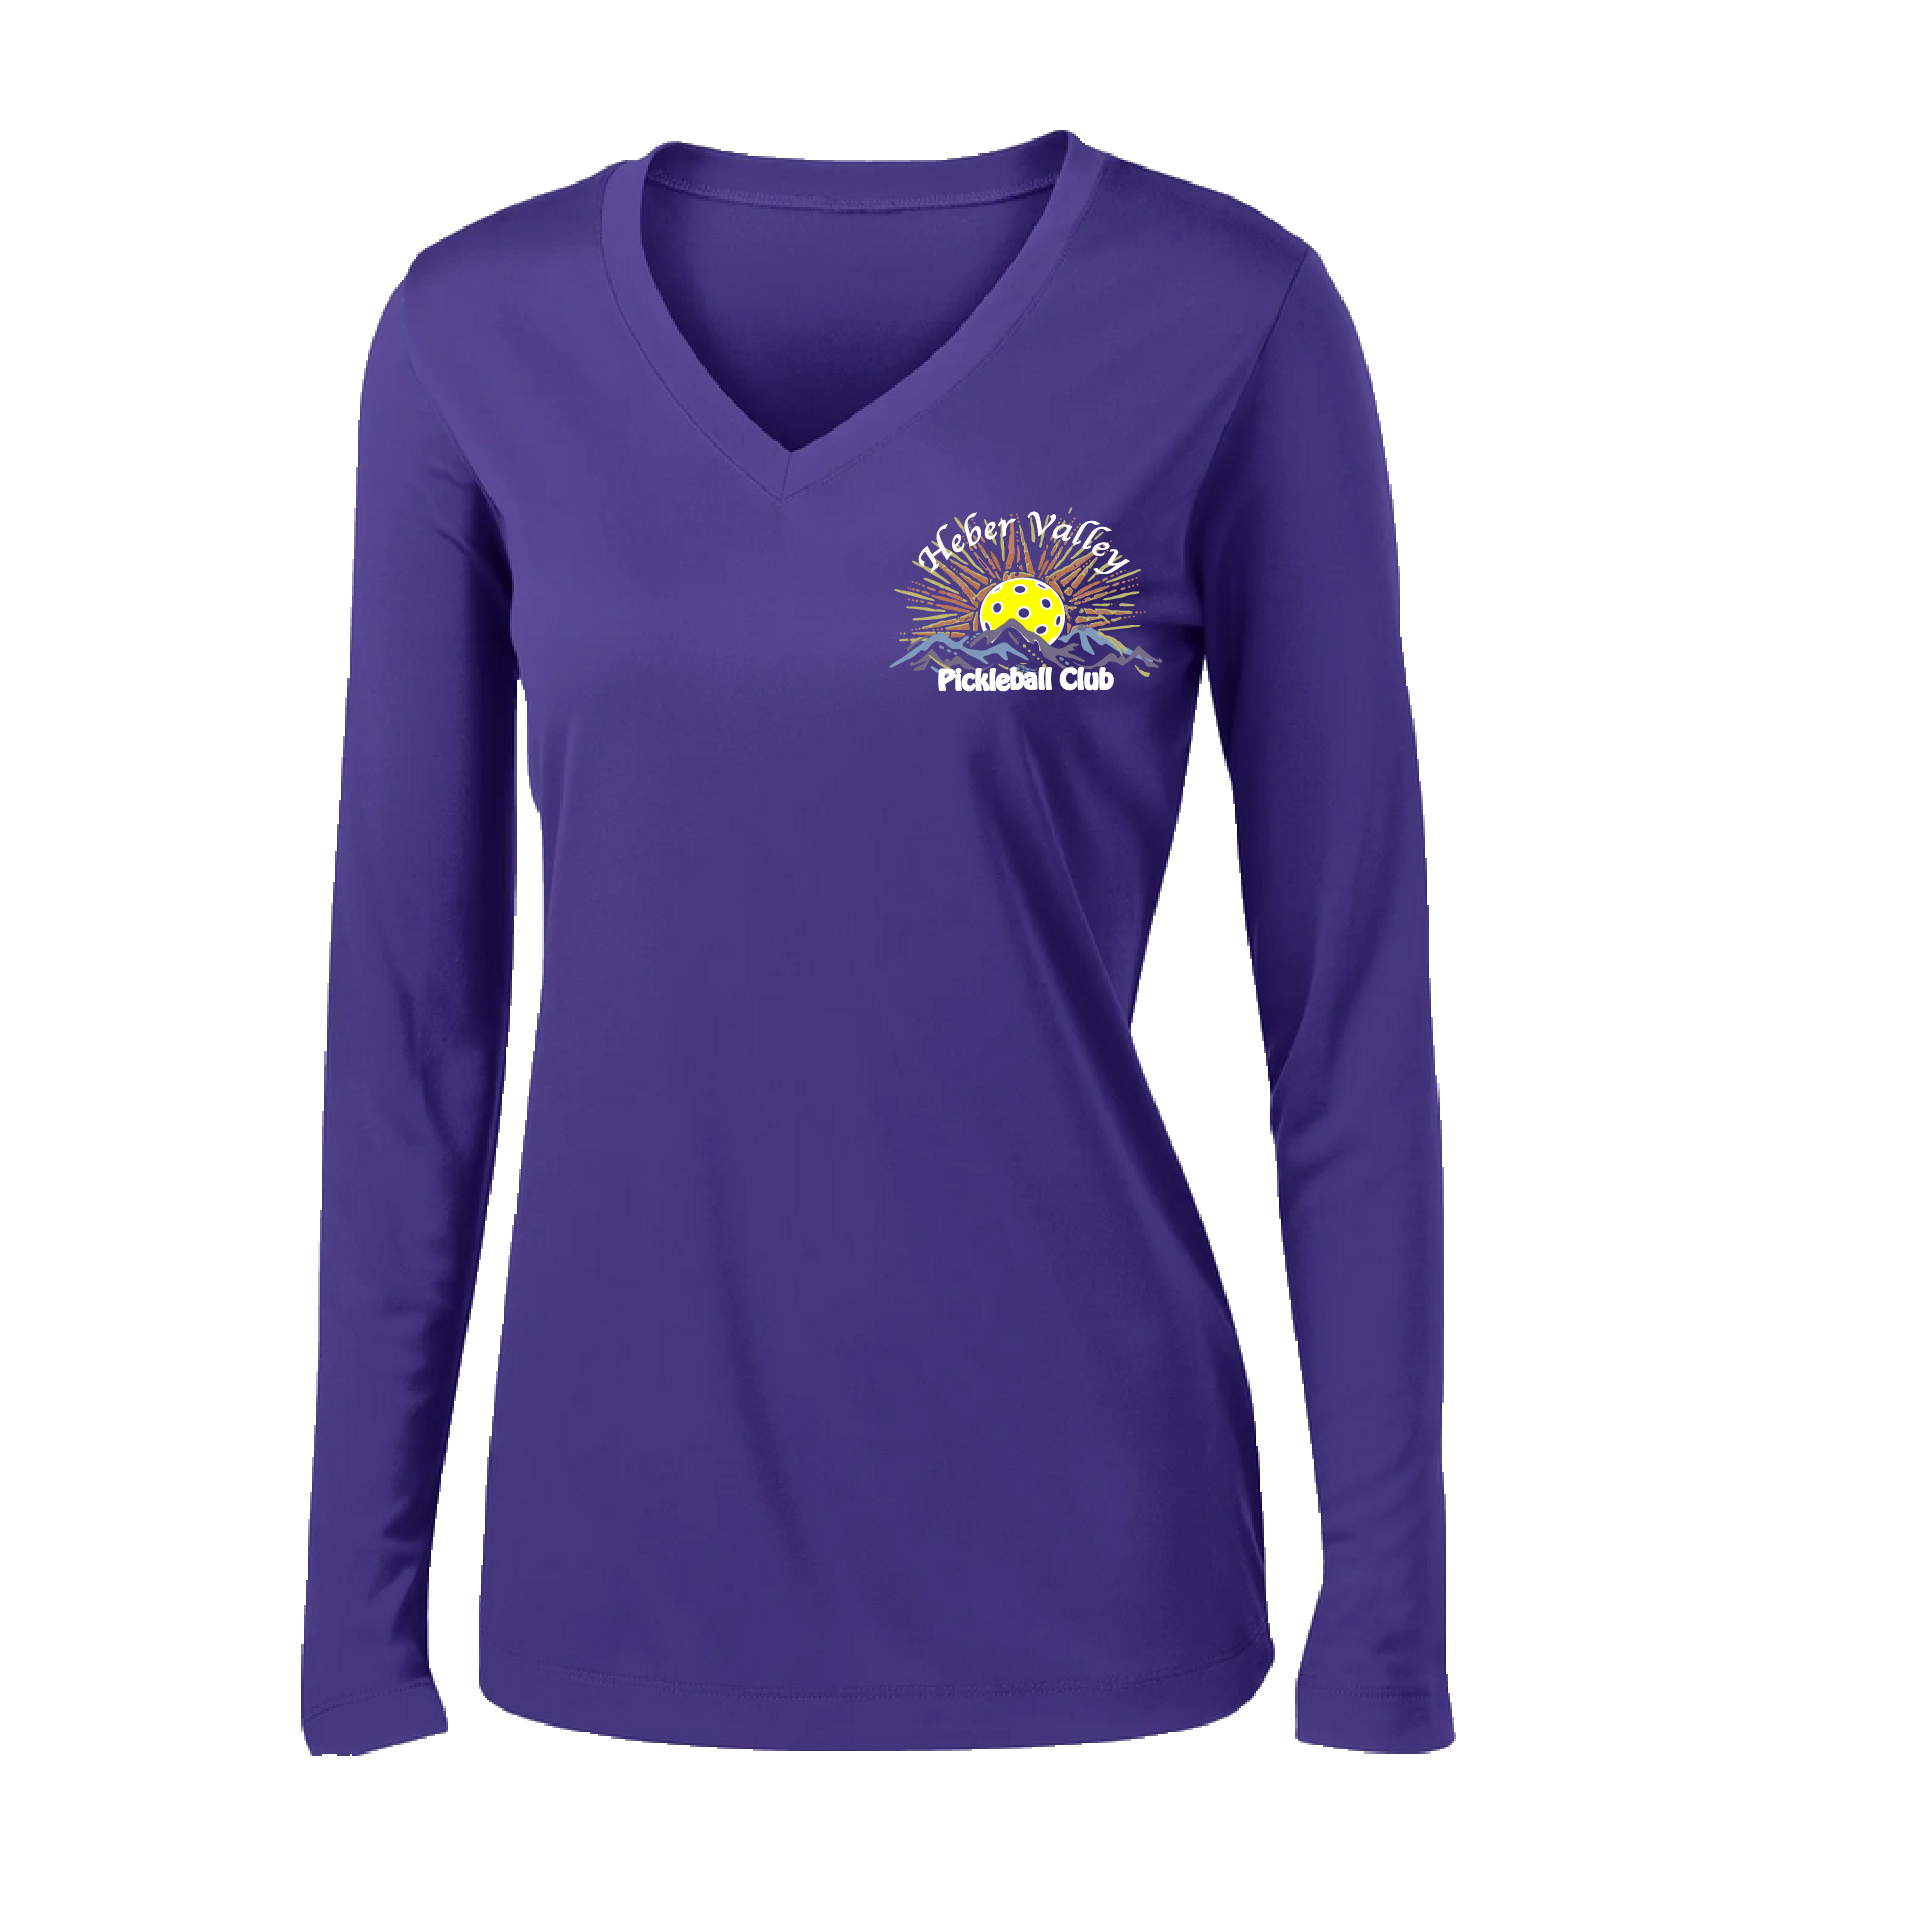 Pickleball Shirt Design: Heber Valley Pickleball Club  Women's Style: Long Sleeve V-Neck  Turn up the volume in this Women's shirt with its perfect mix of softness and attitude. Material is ultra-comfortable with moisture wicking properties and tri-blend softness. PosiCharge technology locks in color. Highly breathable and lightweight.